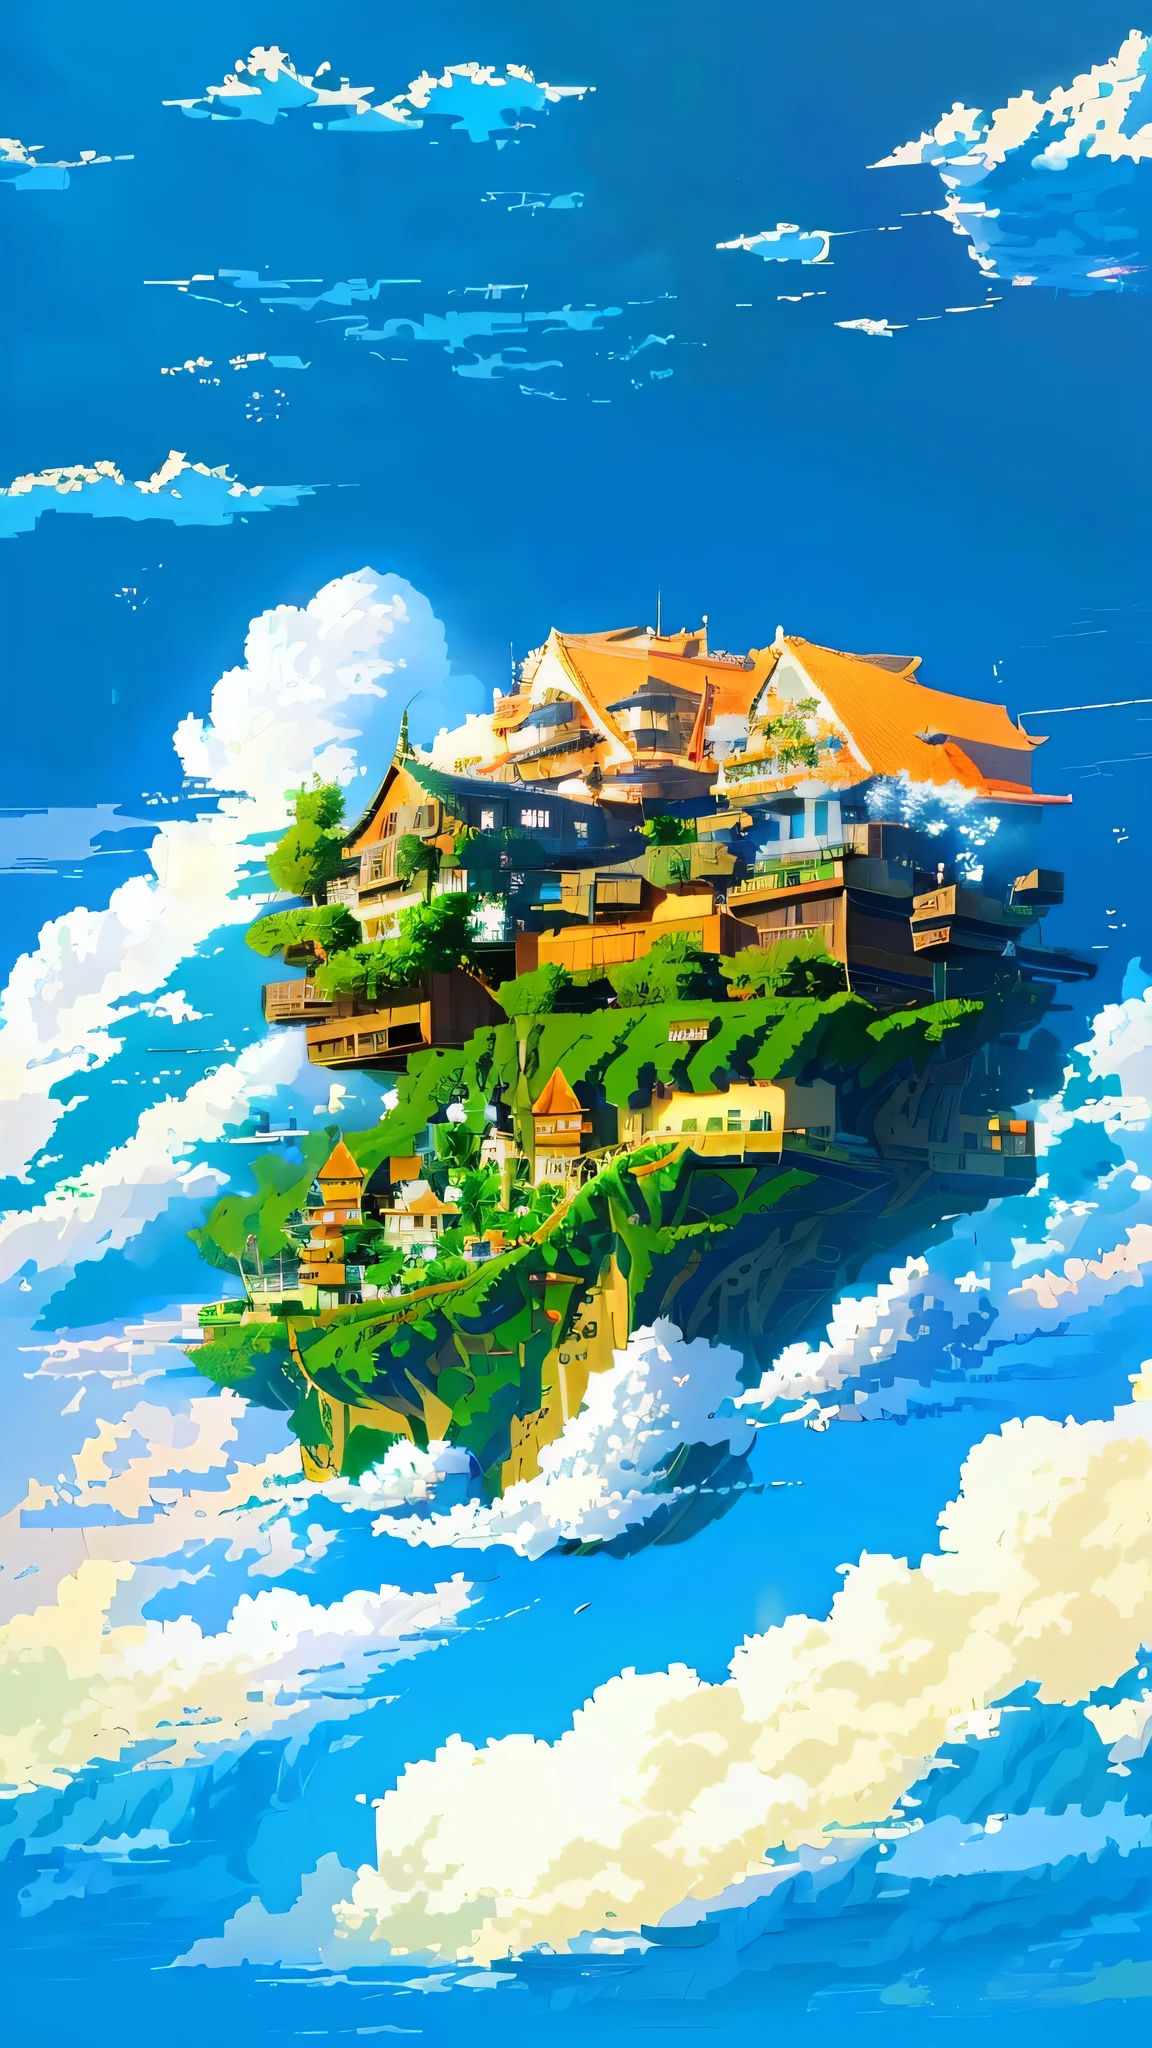 anime landscape with a floating houses on a whale in the sky, flying cloud castle, floating houses in the sky style, floating city on clouds, floating houses island in the sky, isometric island in the sky, castle in the sky, floating houses in the sky, floating island in the sky, floating city in the sky, covered in dark green grasses and red wisteria, baseless floating houses engulfed with clouds, beautiful detailed pixel art, cloud palace, studio ghibli sky